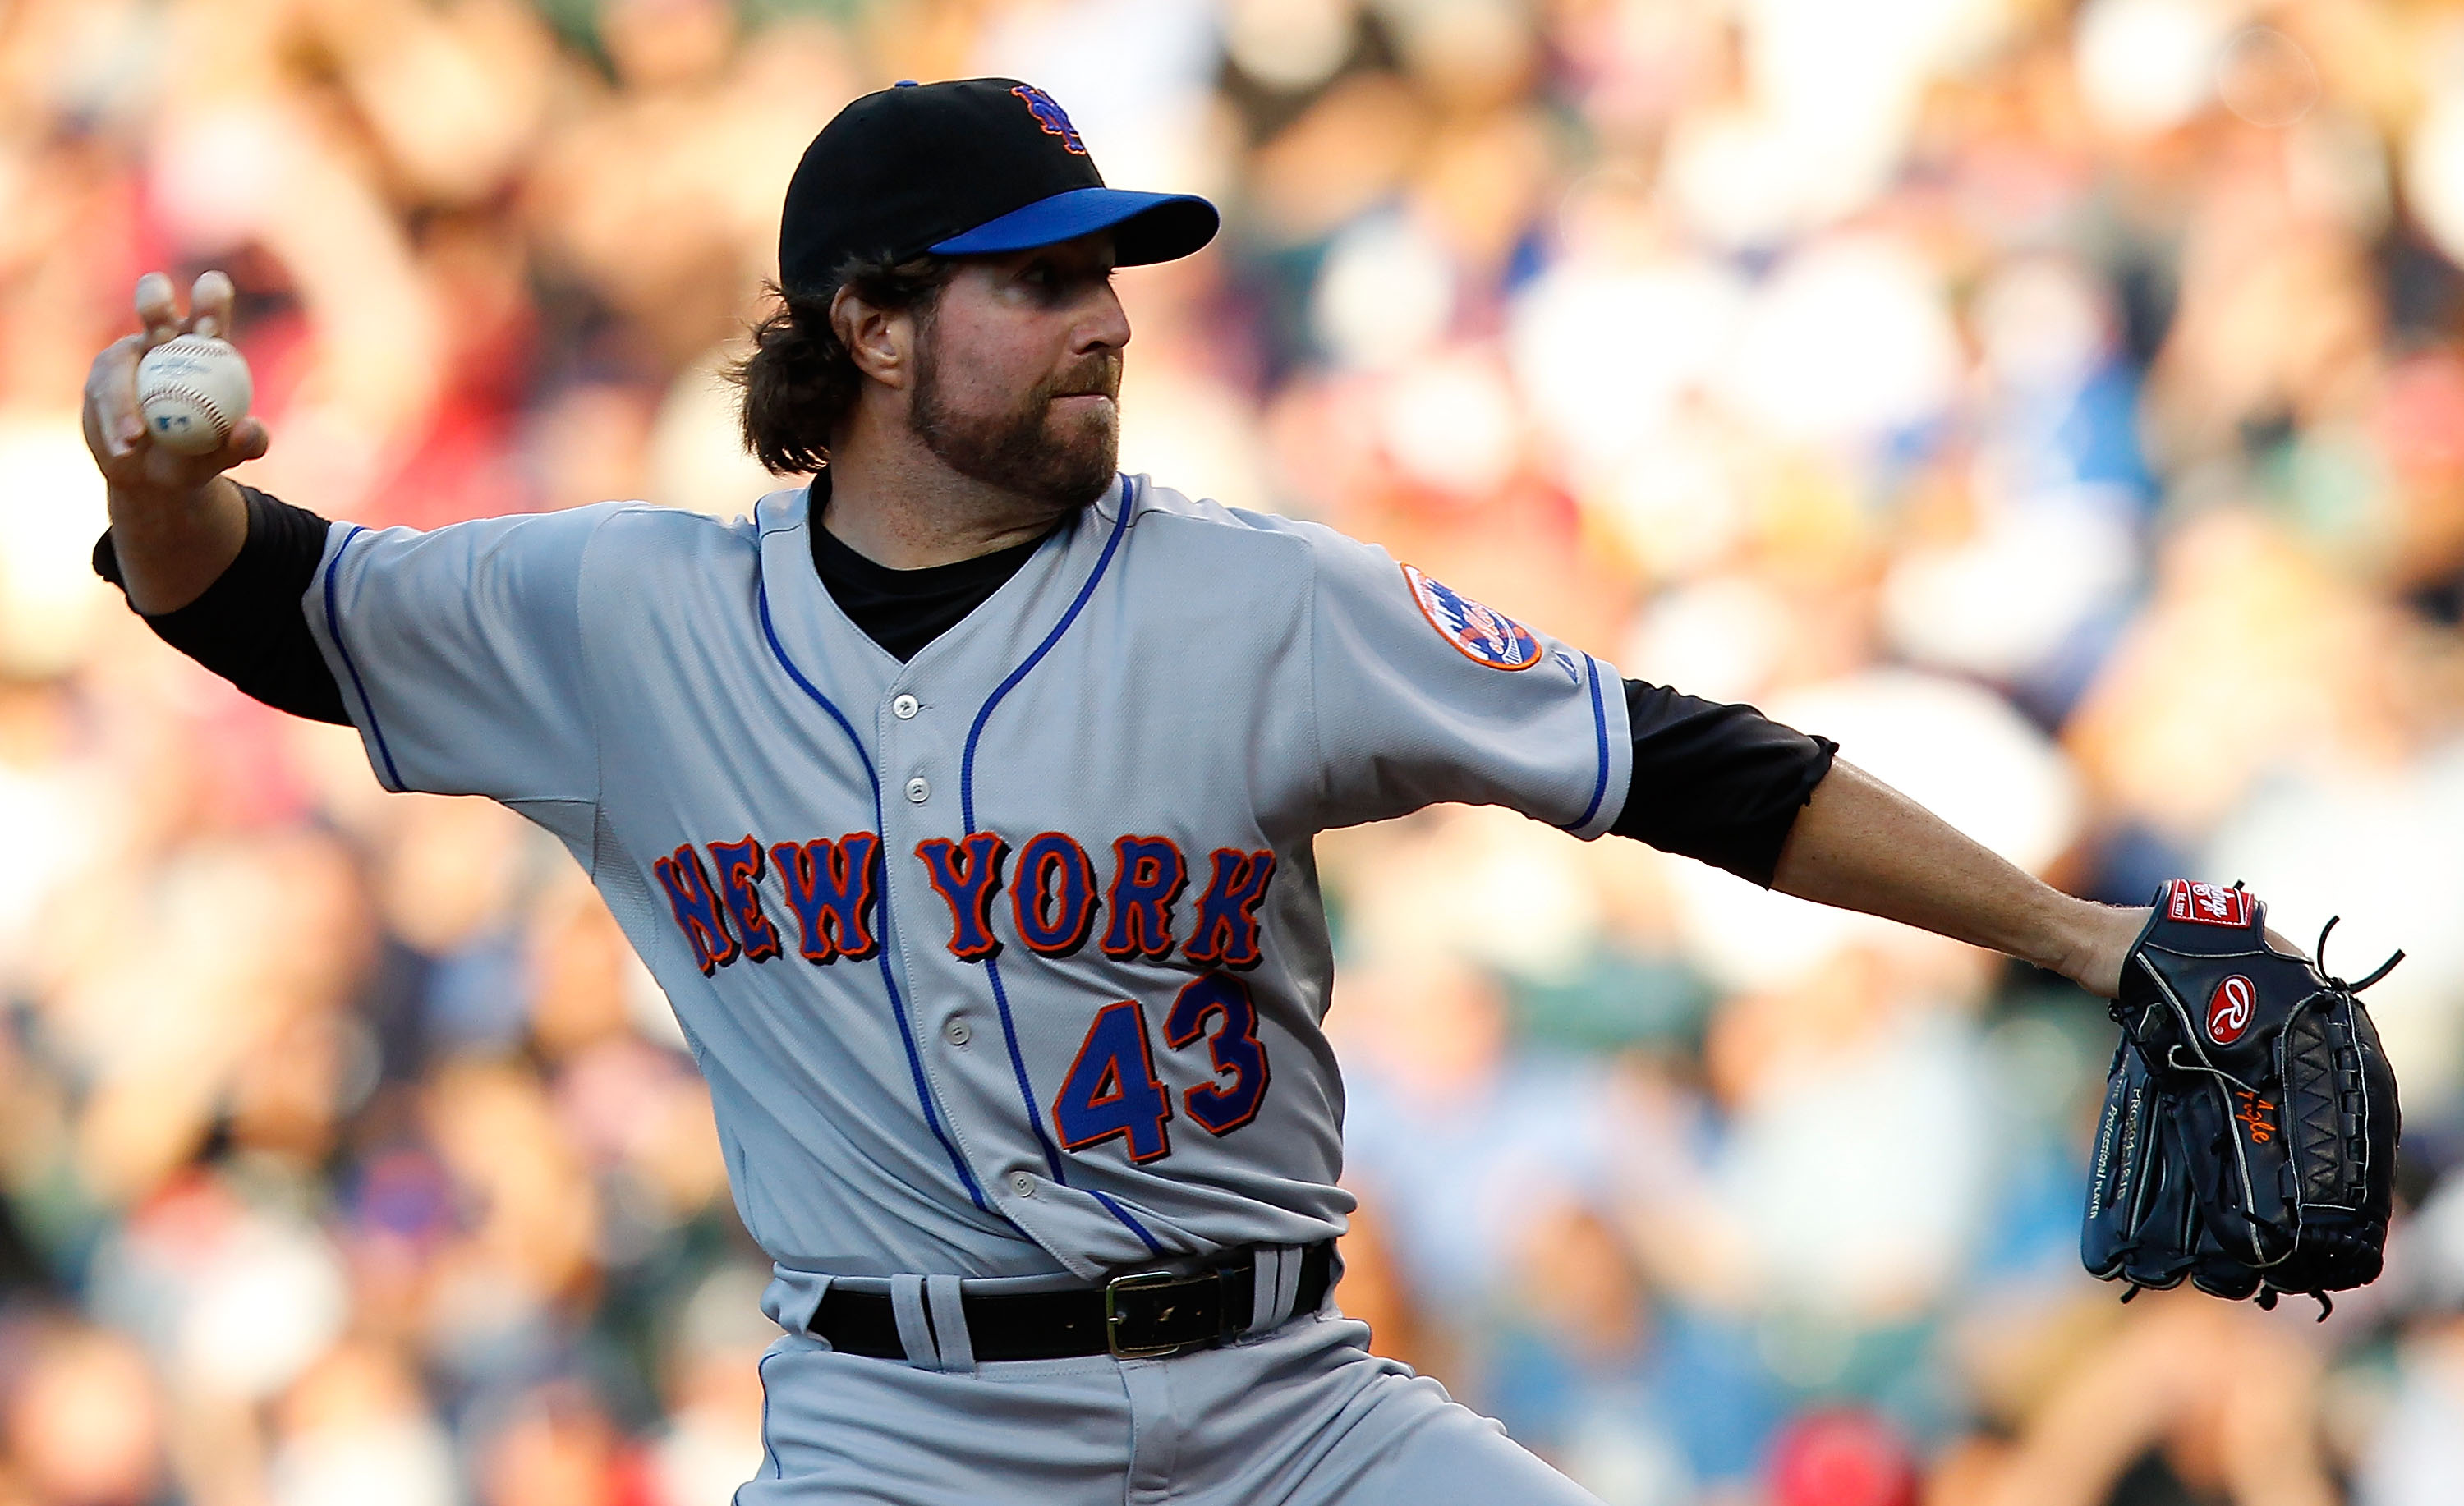 R. A. Dickey Deserved Better from Mets - The New York Times